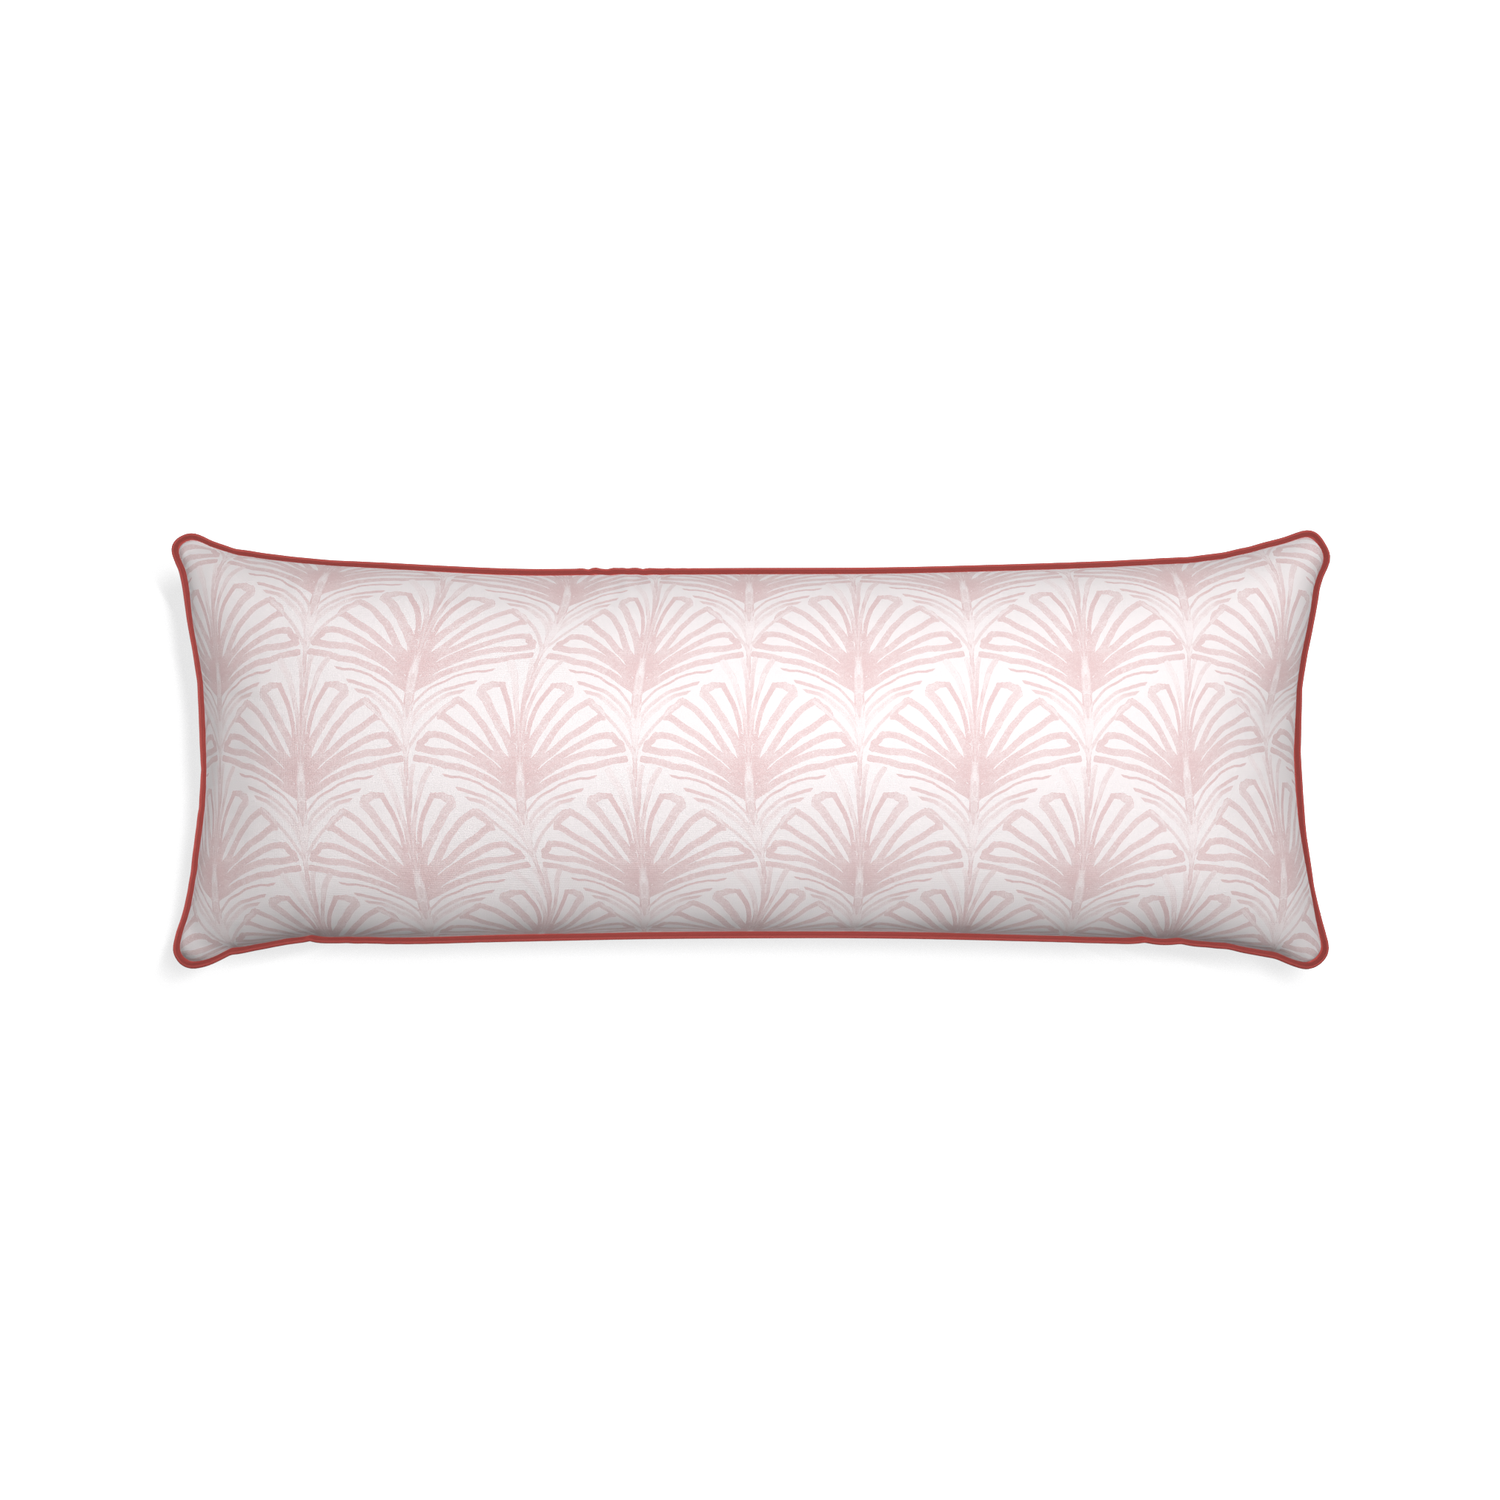 Xl-lumbar suzy rose custom pillow with c piping on white background